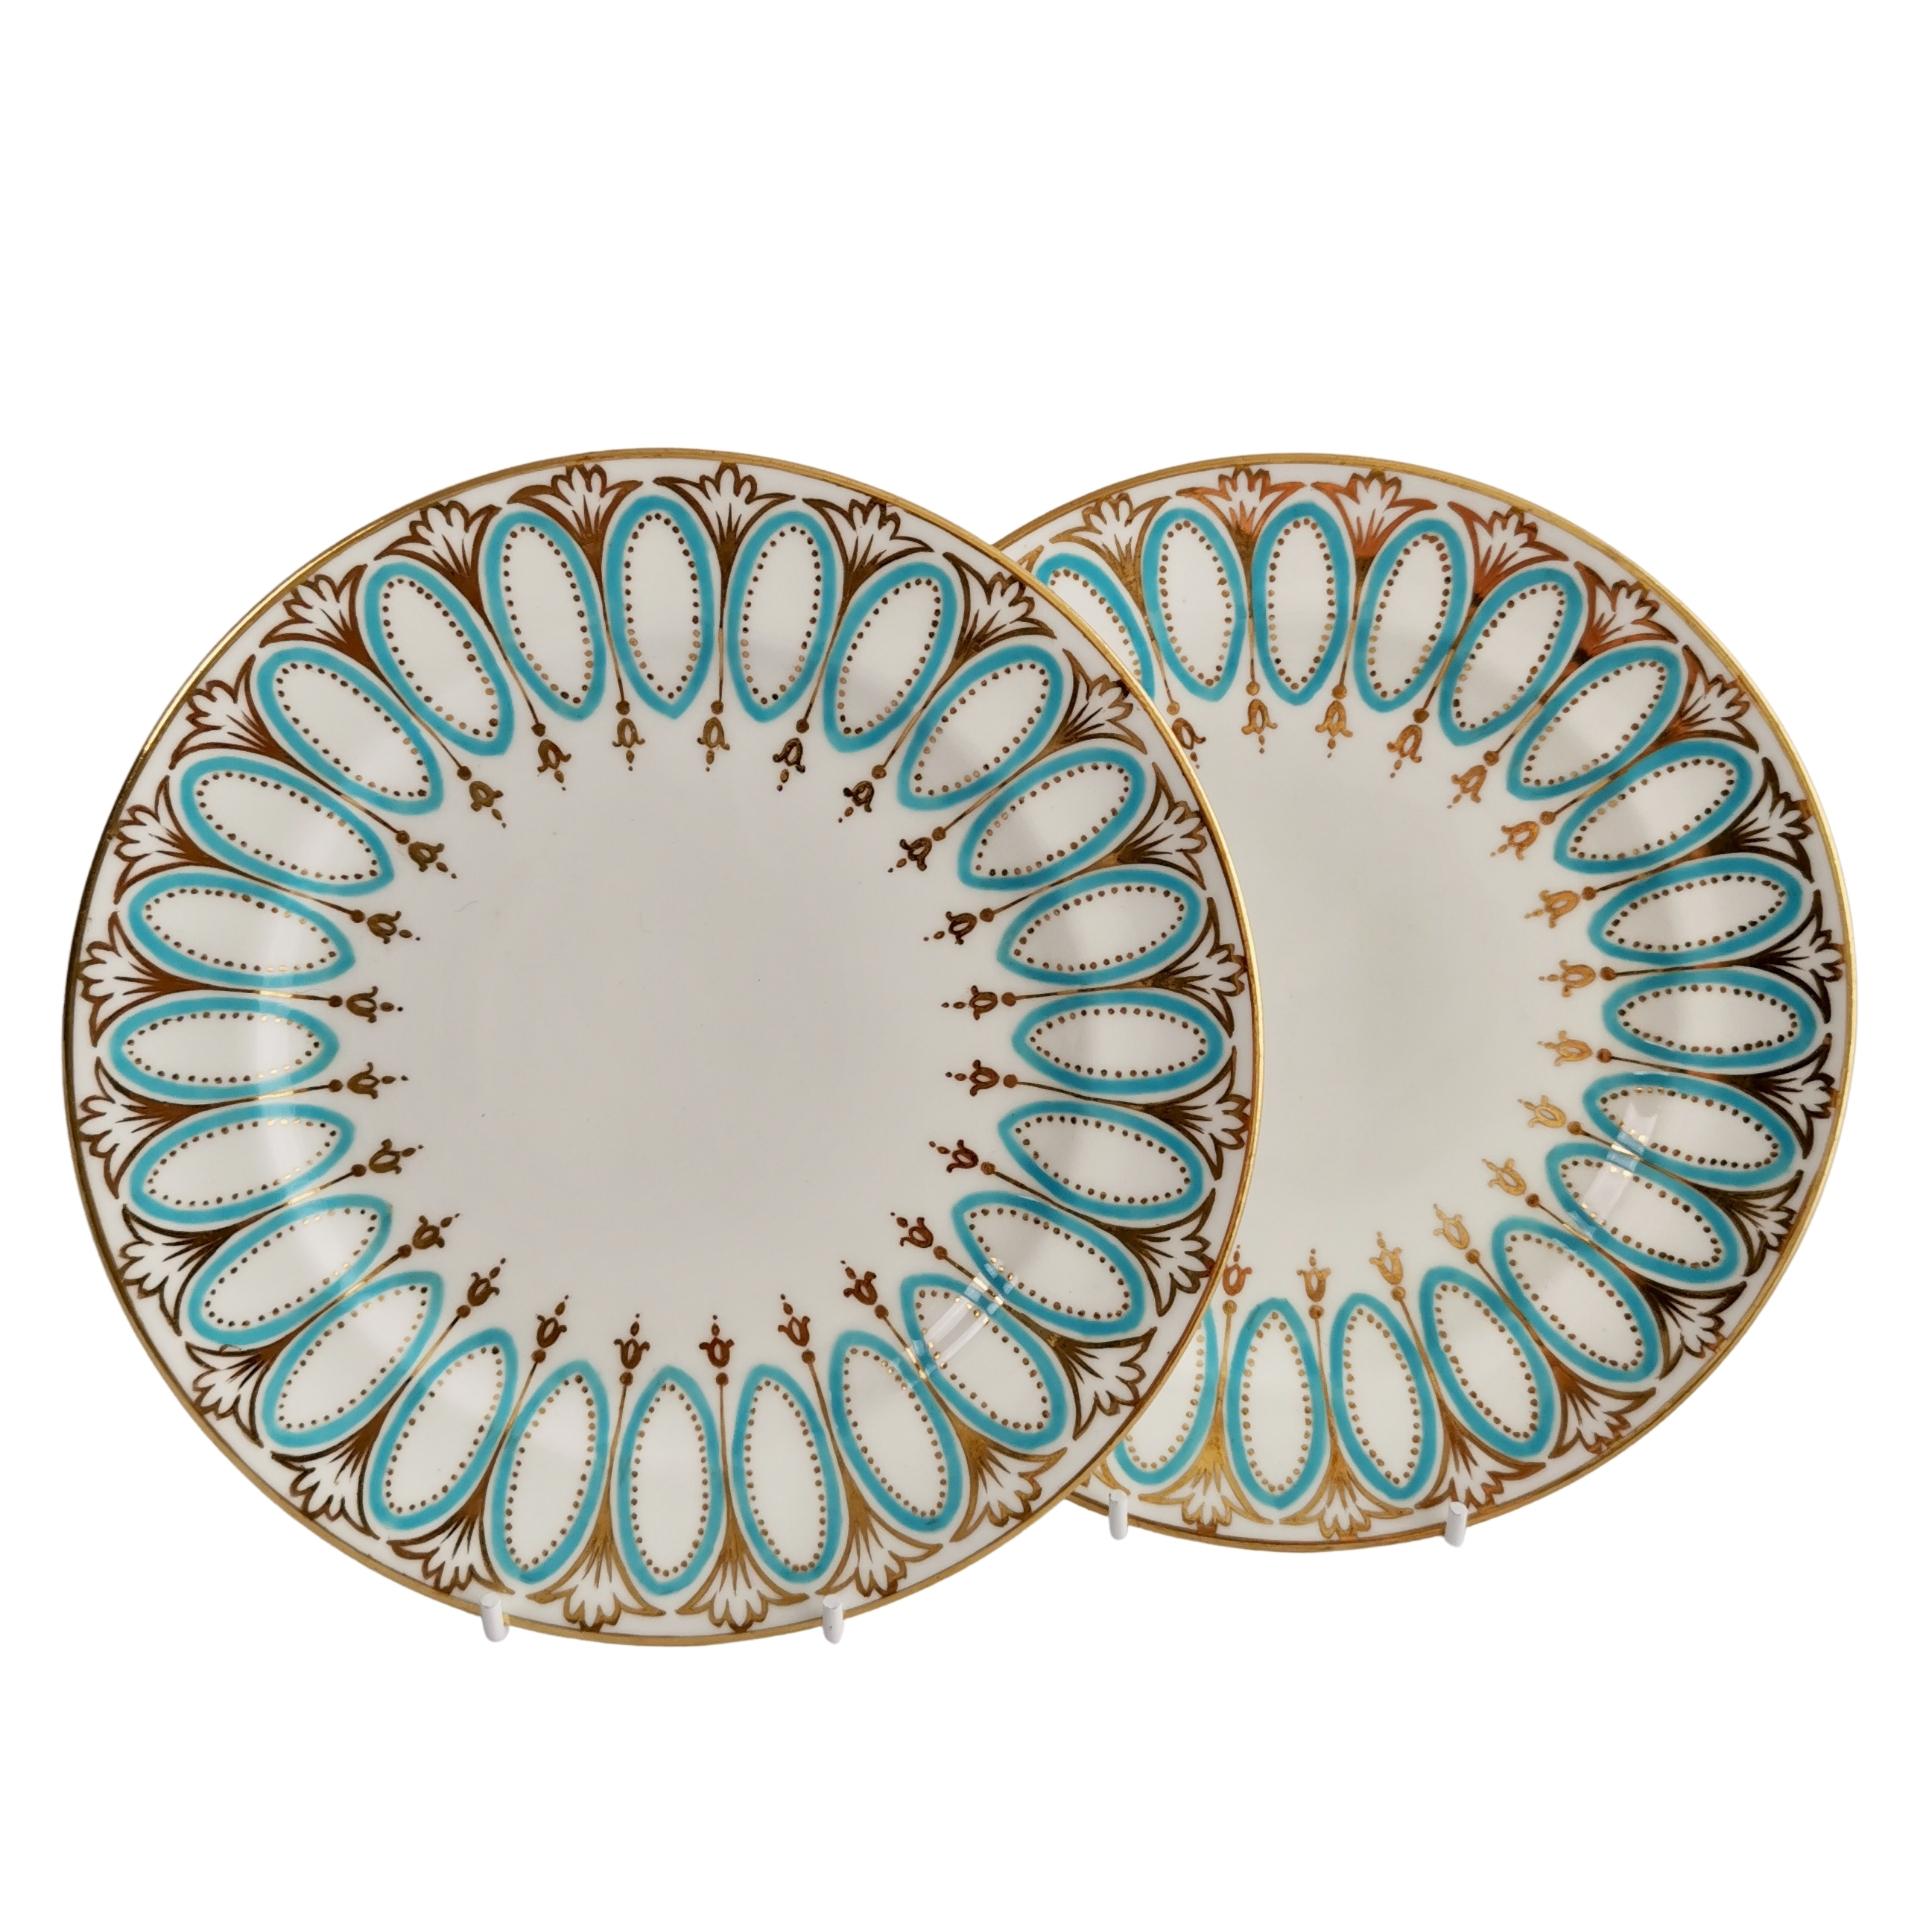 Pair of Hammersley Tea Plates, White, Gilt and Turquoise, Edwardian Early 20th C